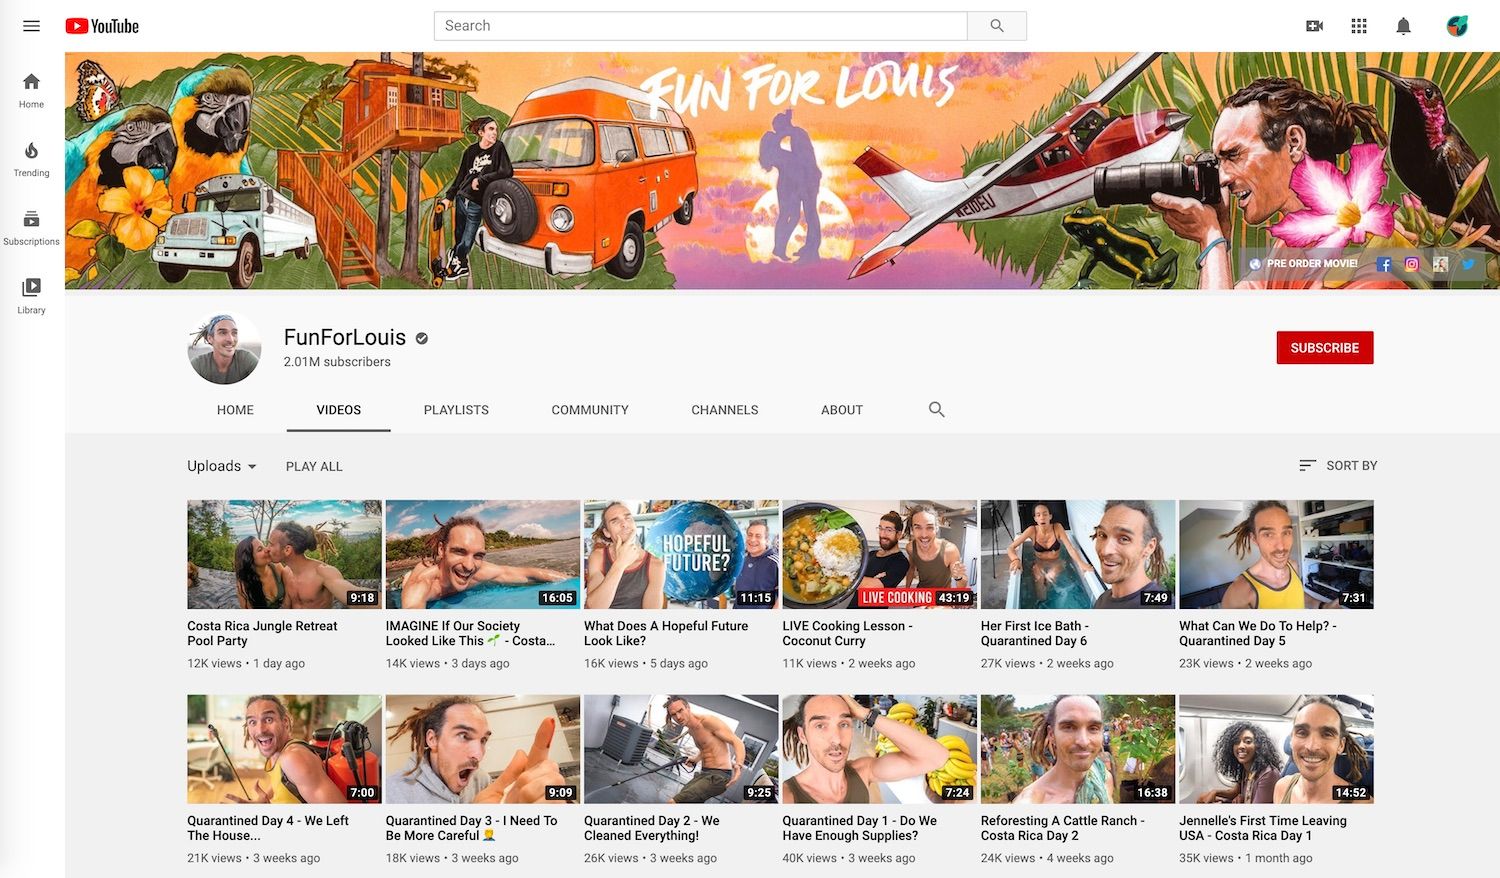 Cole Louis's YouTube channel 'Fun For Louis' has over 2 million subscribers.